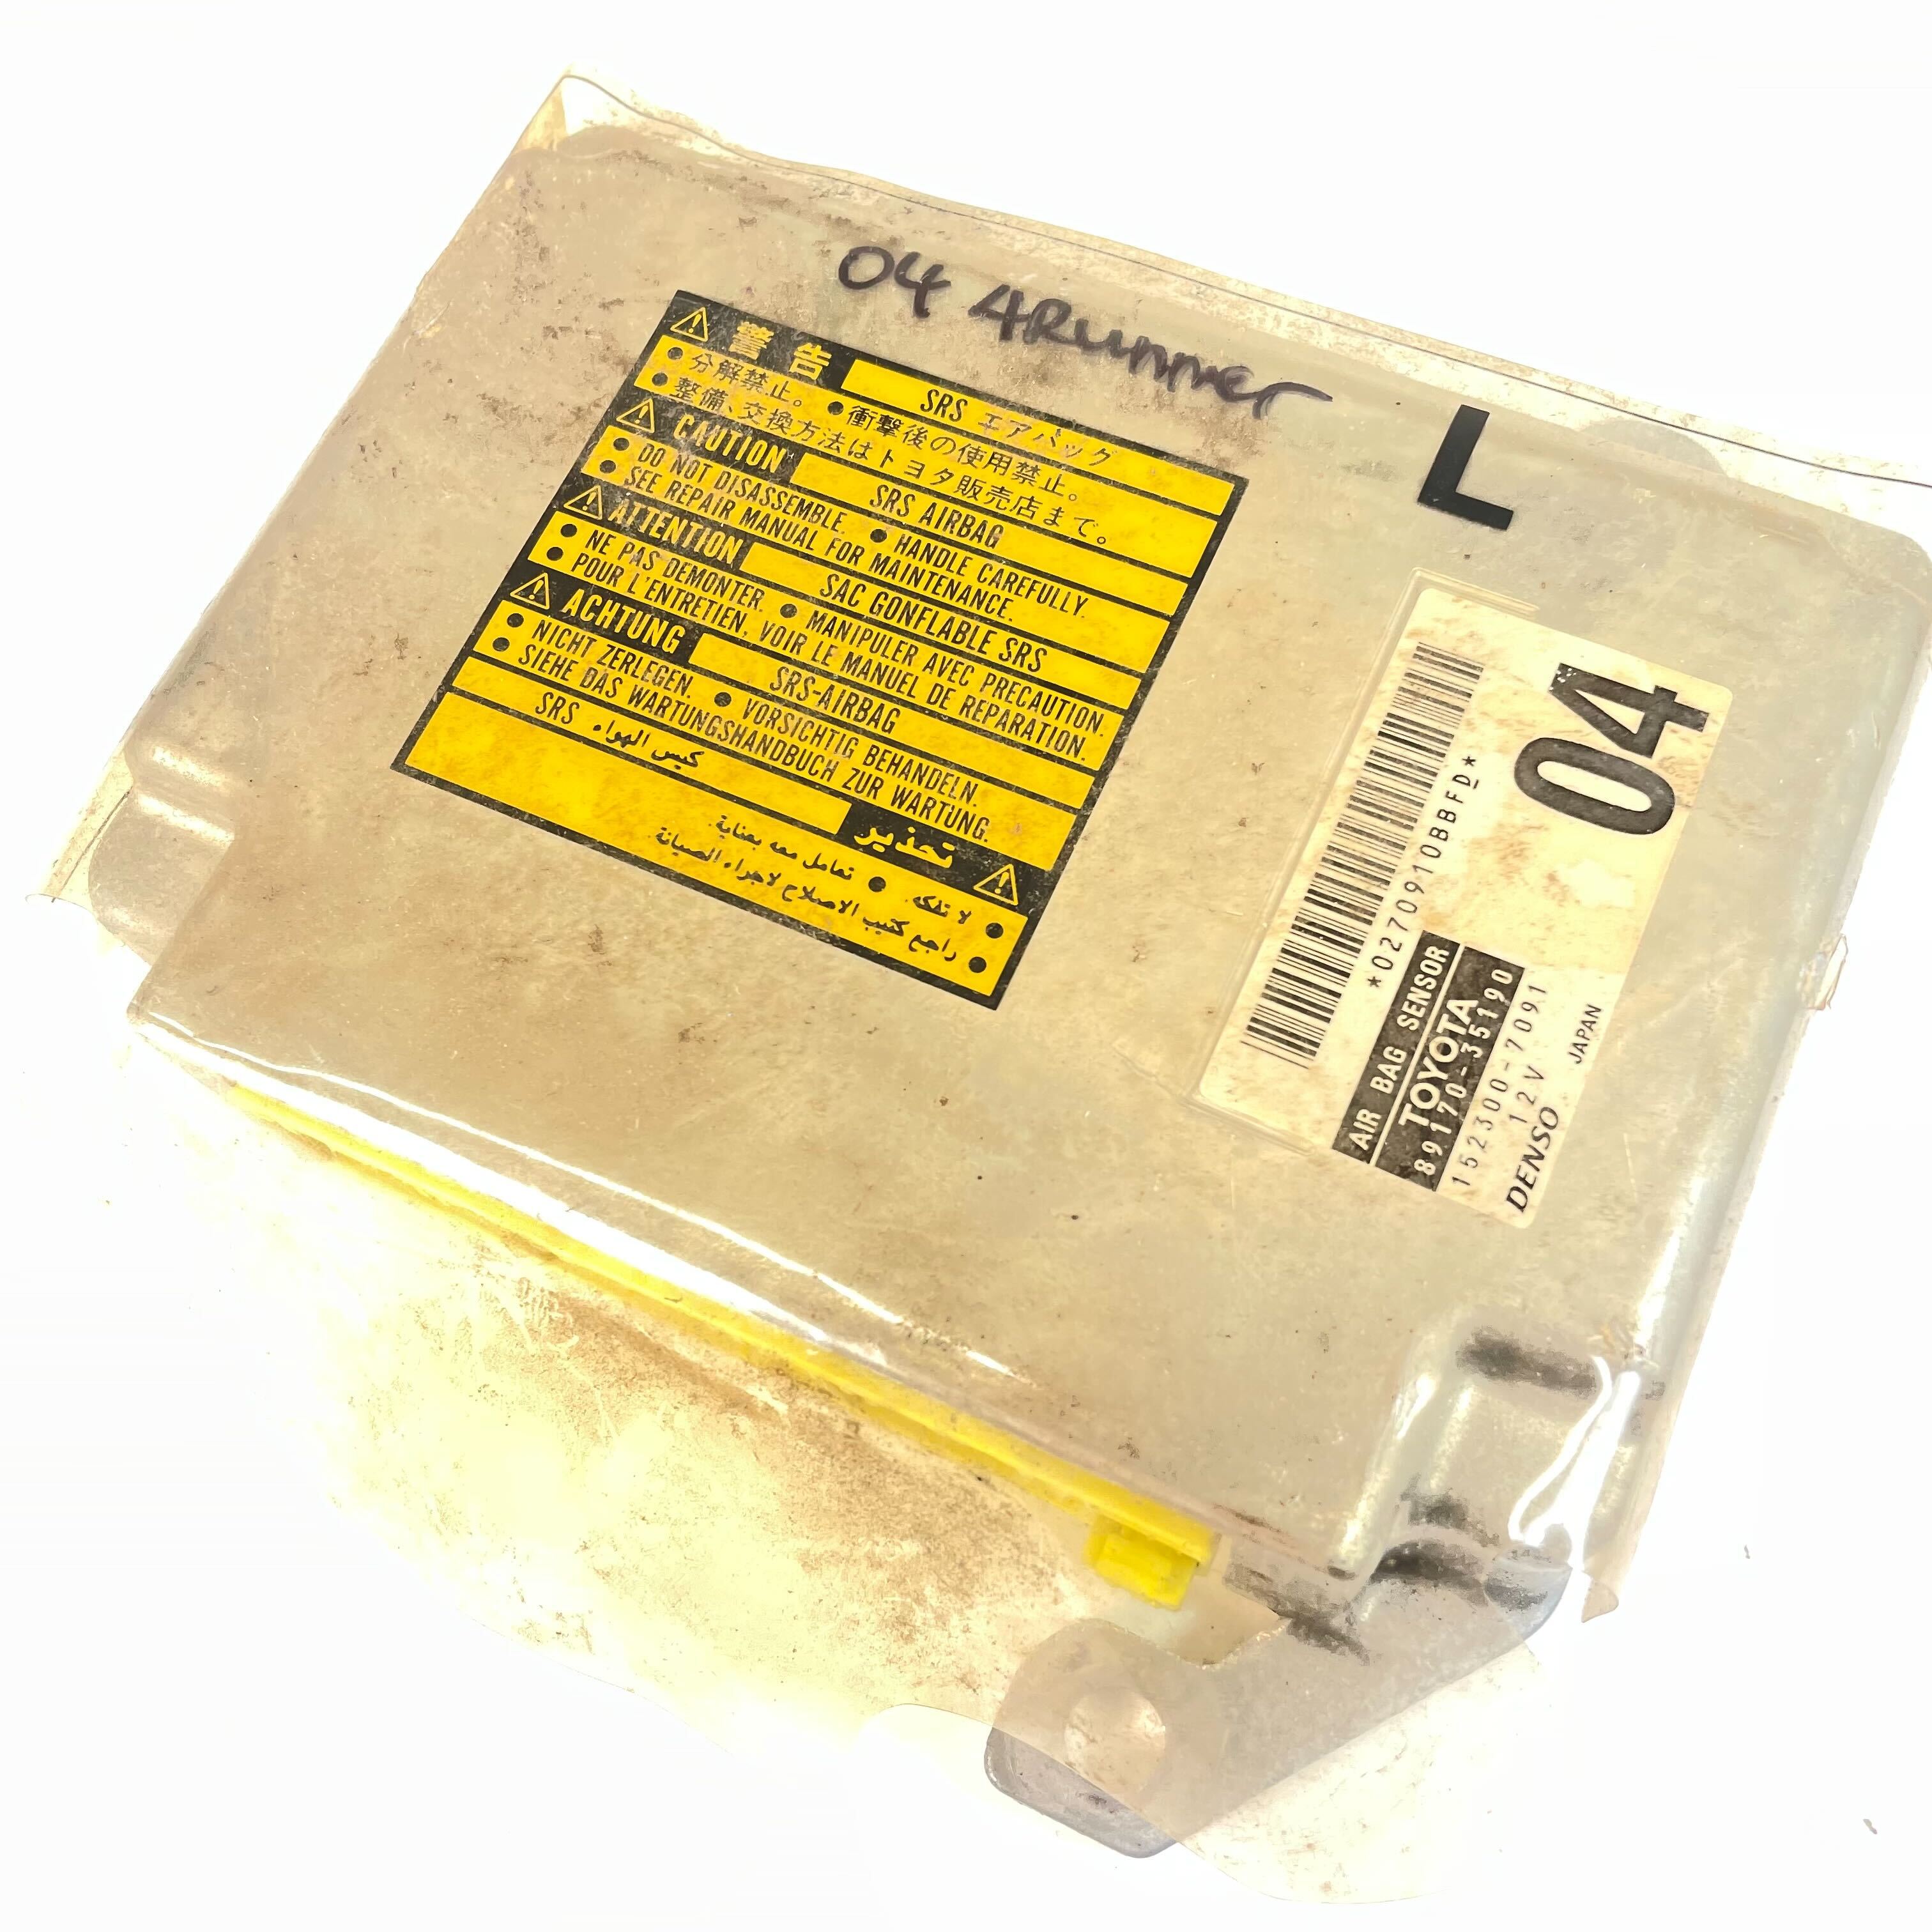 TOYOTA 4 RUNNER SRS Airbag Computer Diagnostic Control Module PART #8917035190